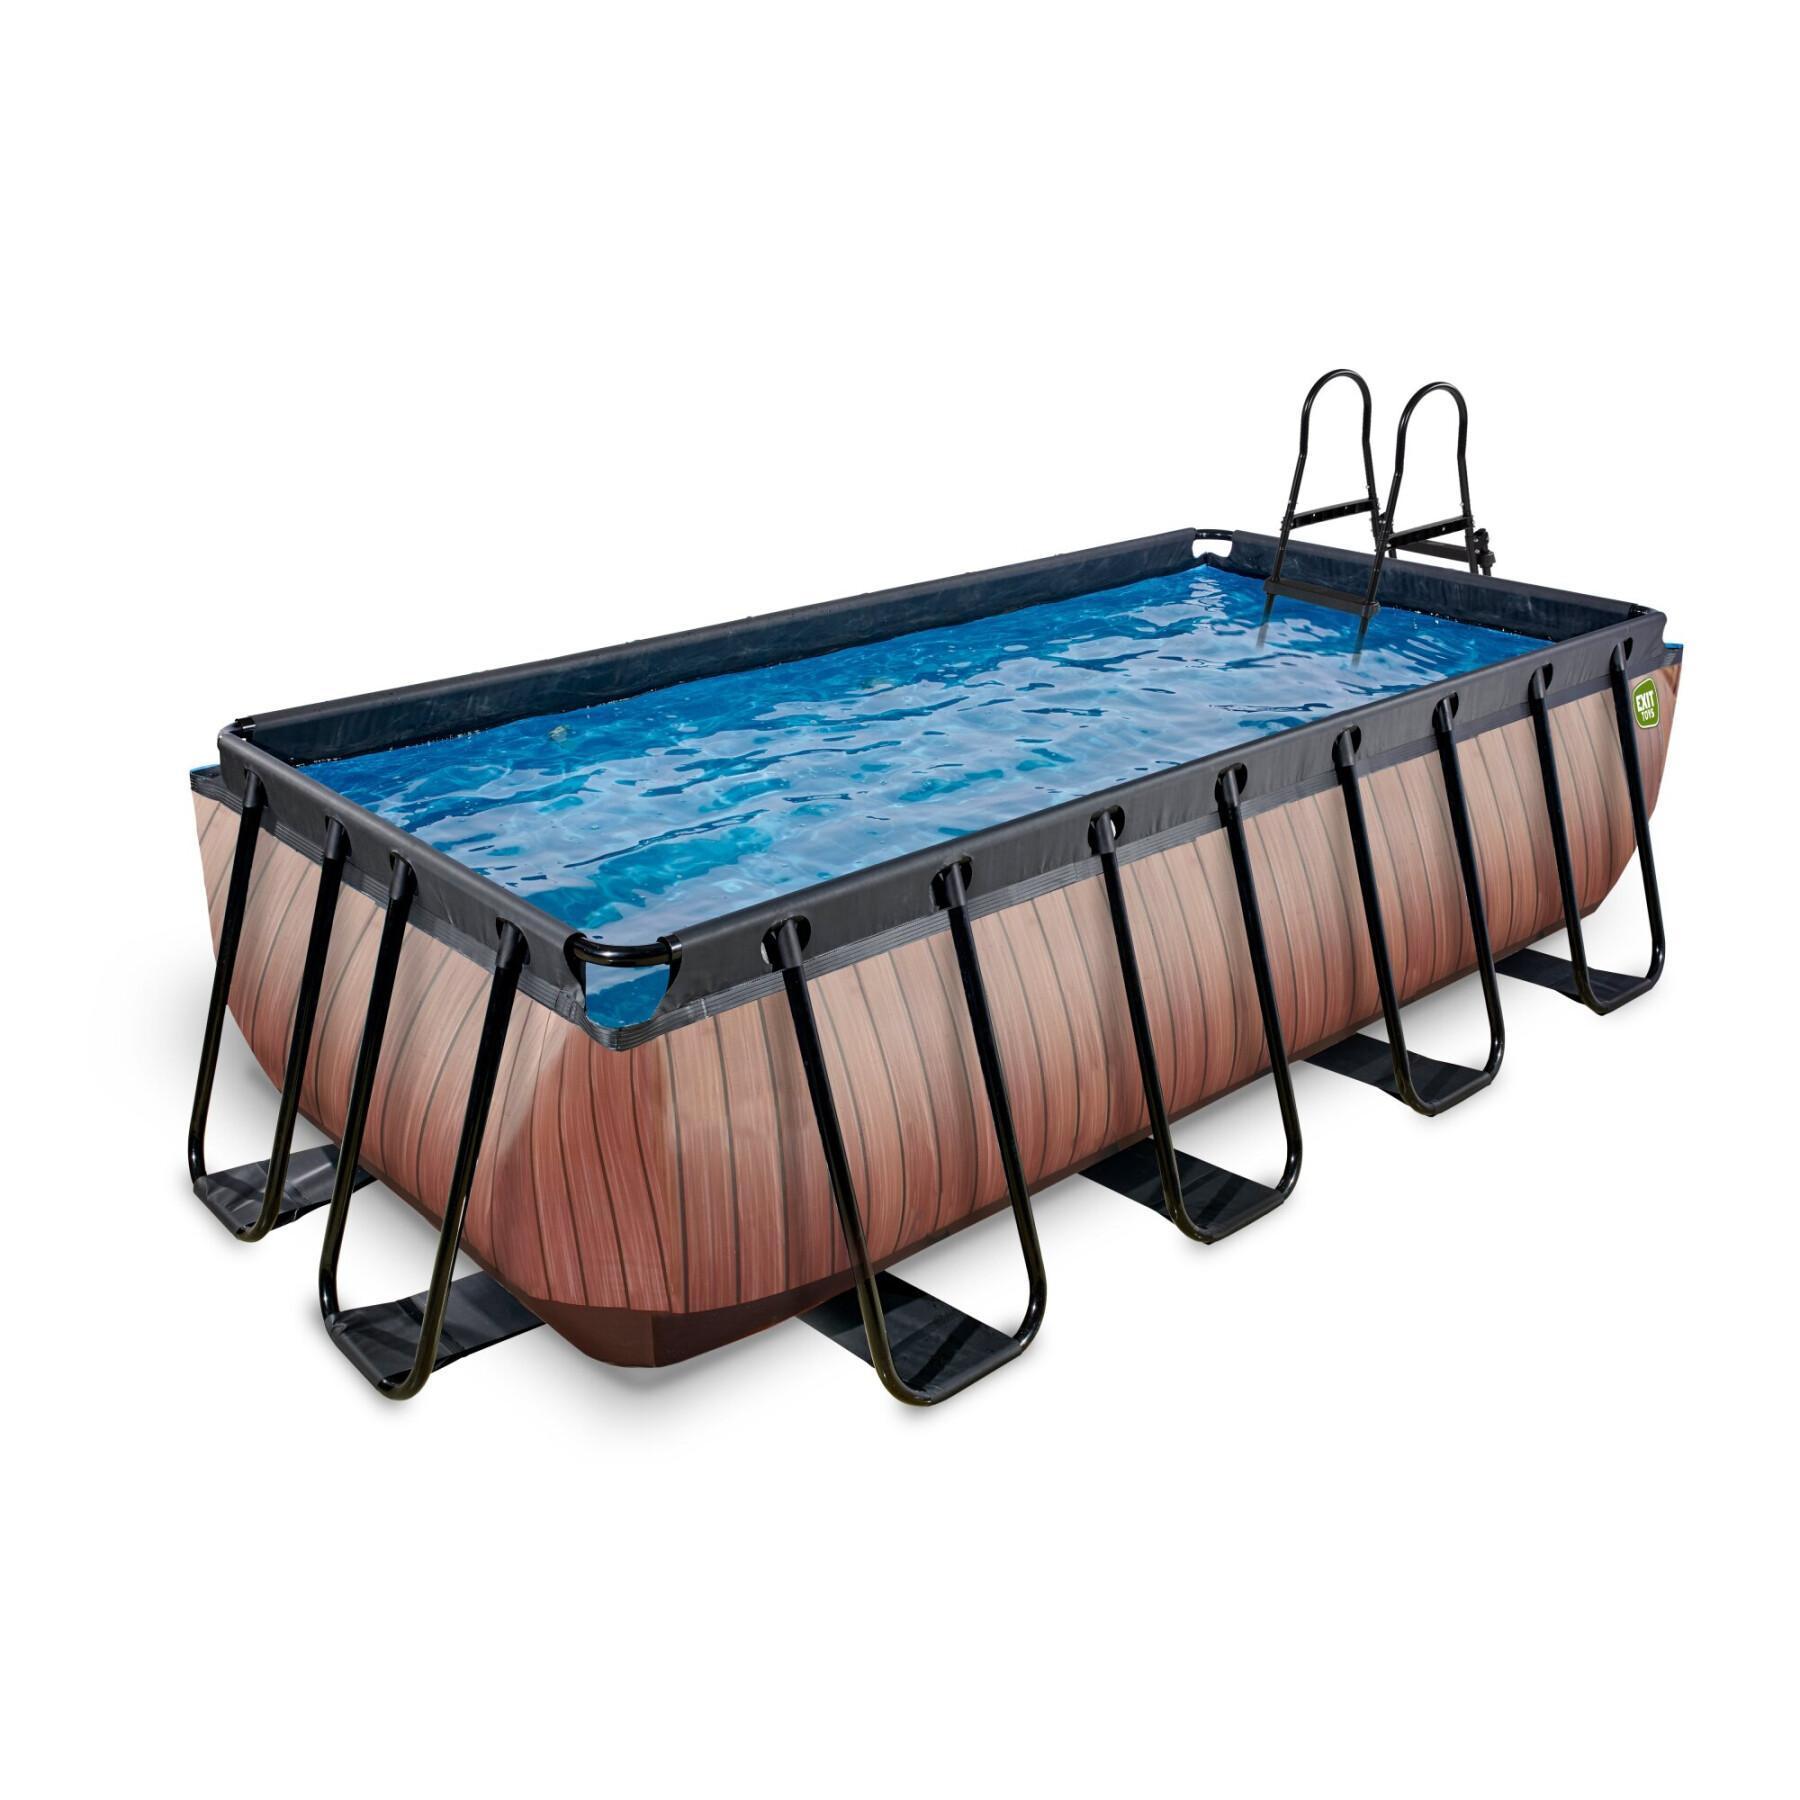 Swimming pool with sand filter pump Exit Toys Wood 400 x 200 x 100 cm